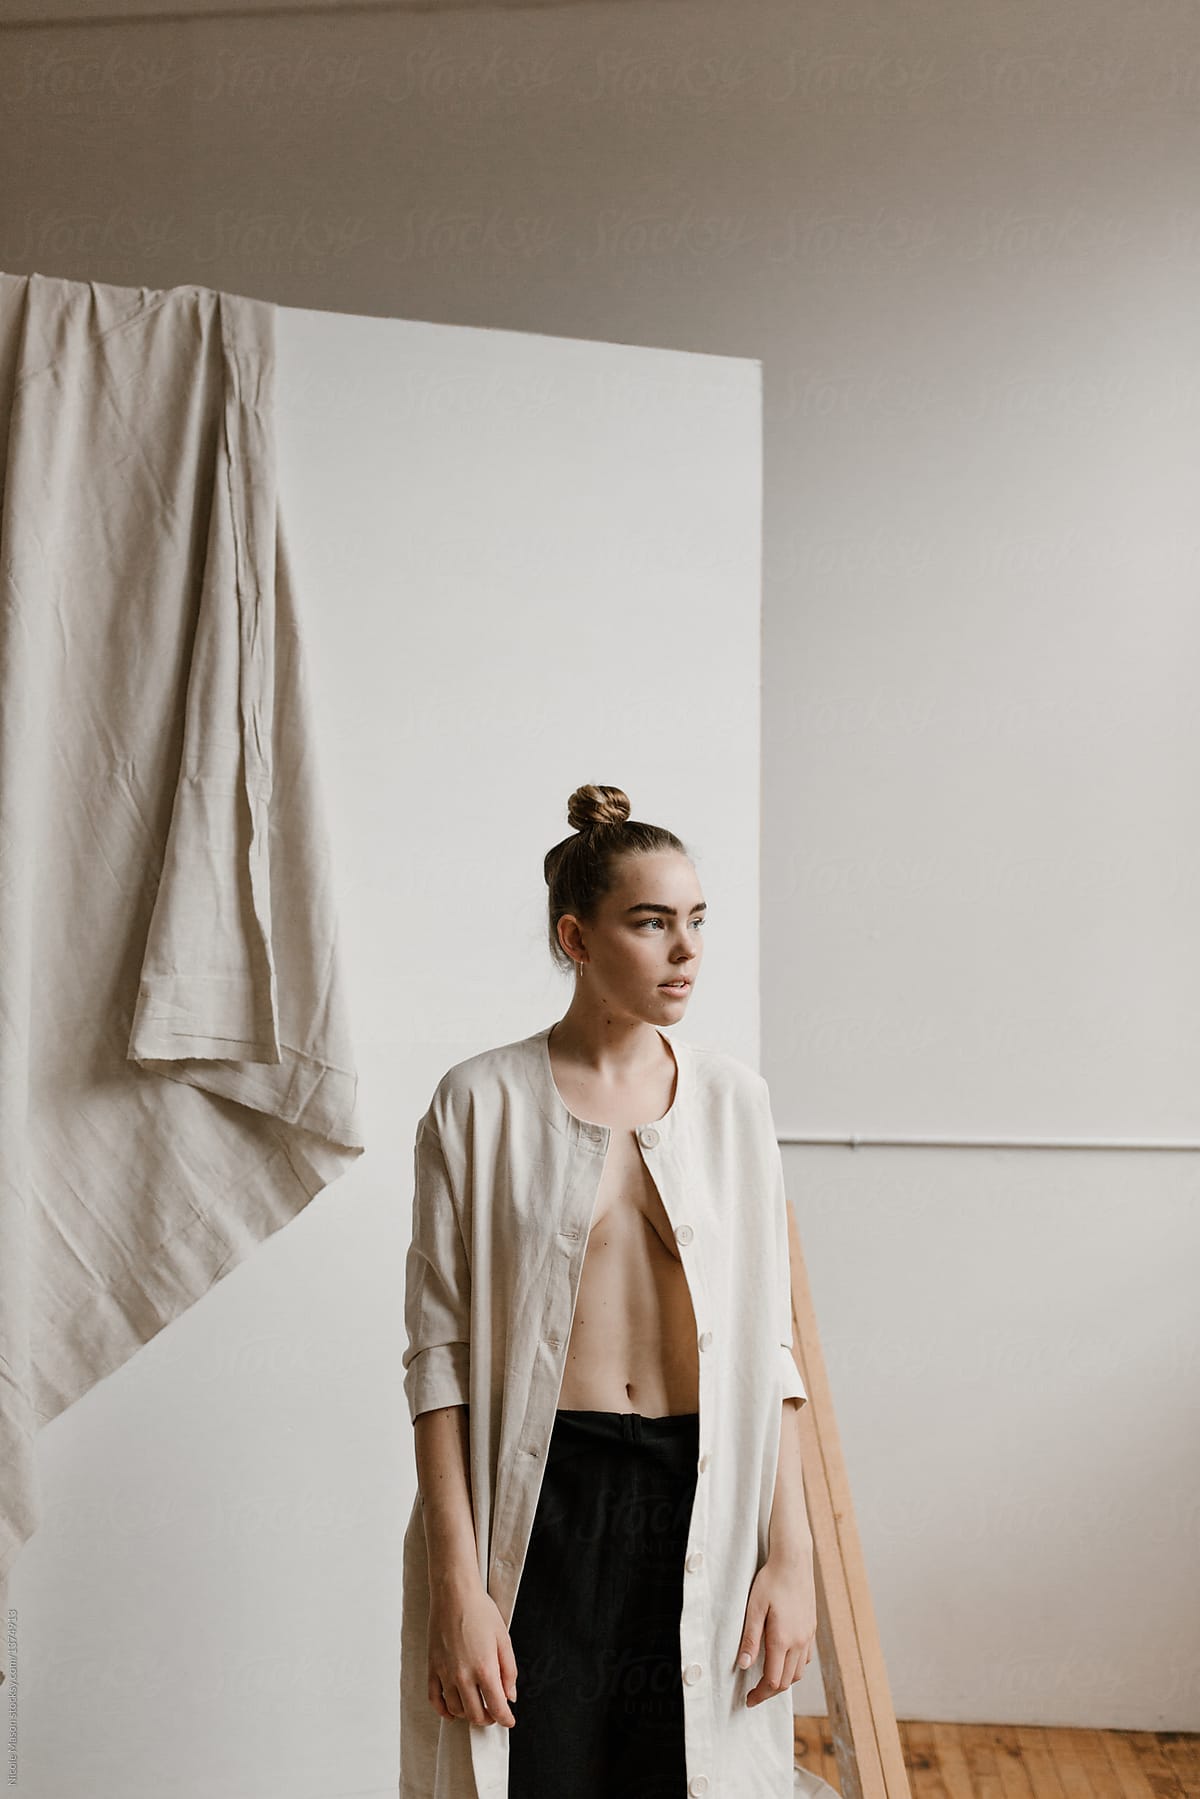 Woman Wearing Open Light Jacket With Nothing Underneath by Stocksy  Contributor Nicole Mason - Stocksy